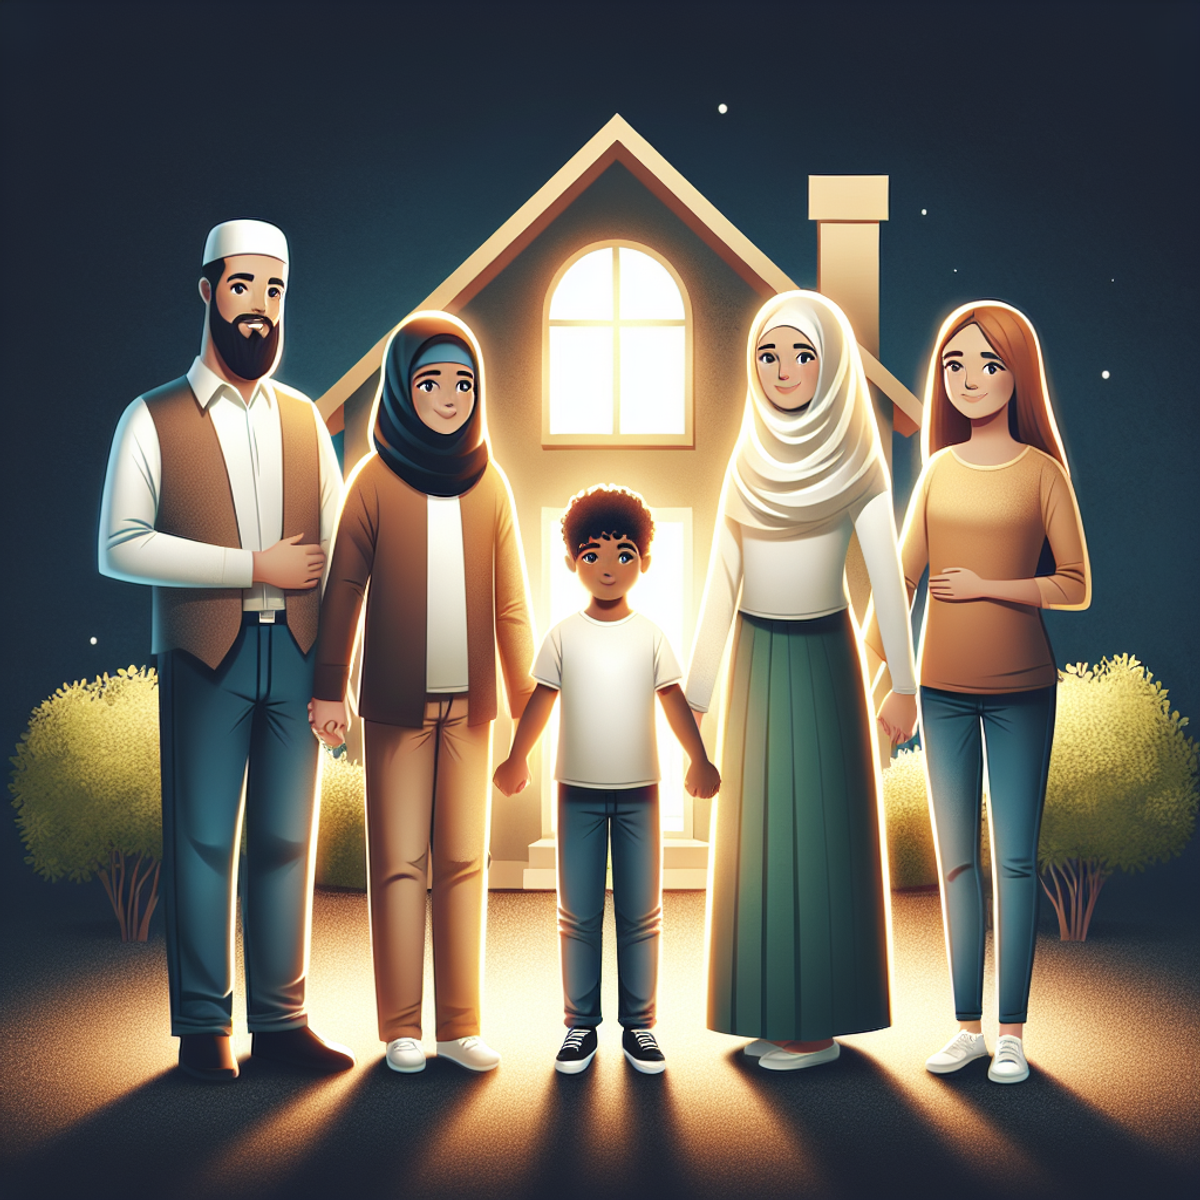 A diverse family of four standing in front of a house, symbolizing the importance of life insurance in ensuring the well-being of family.